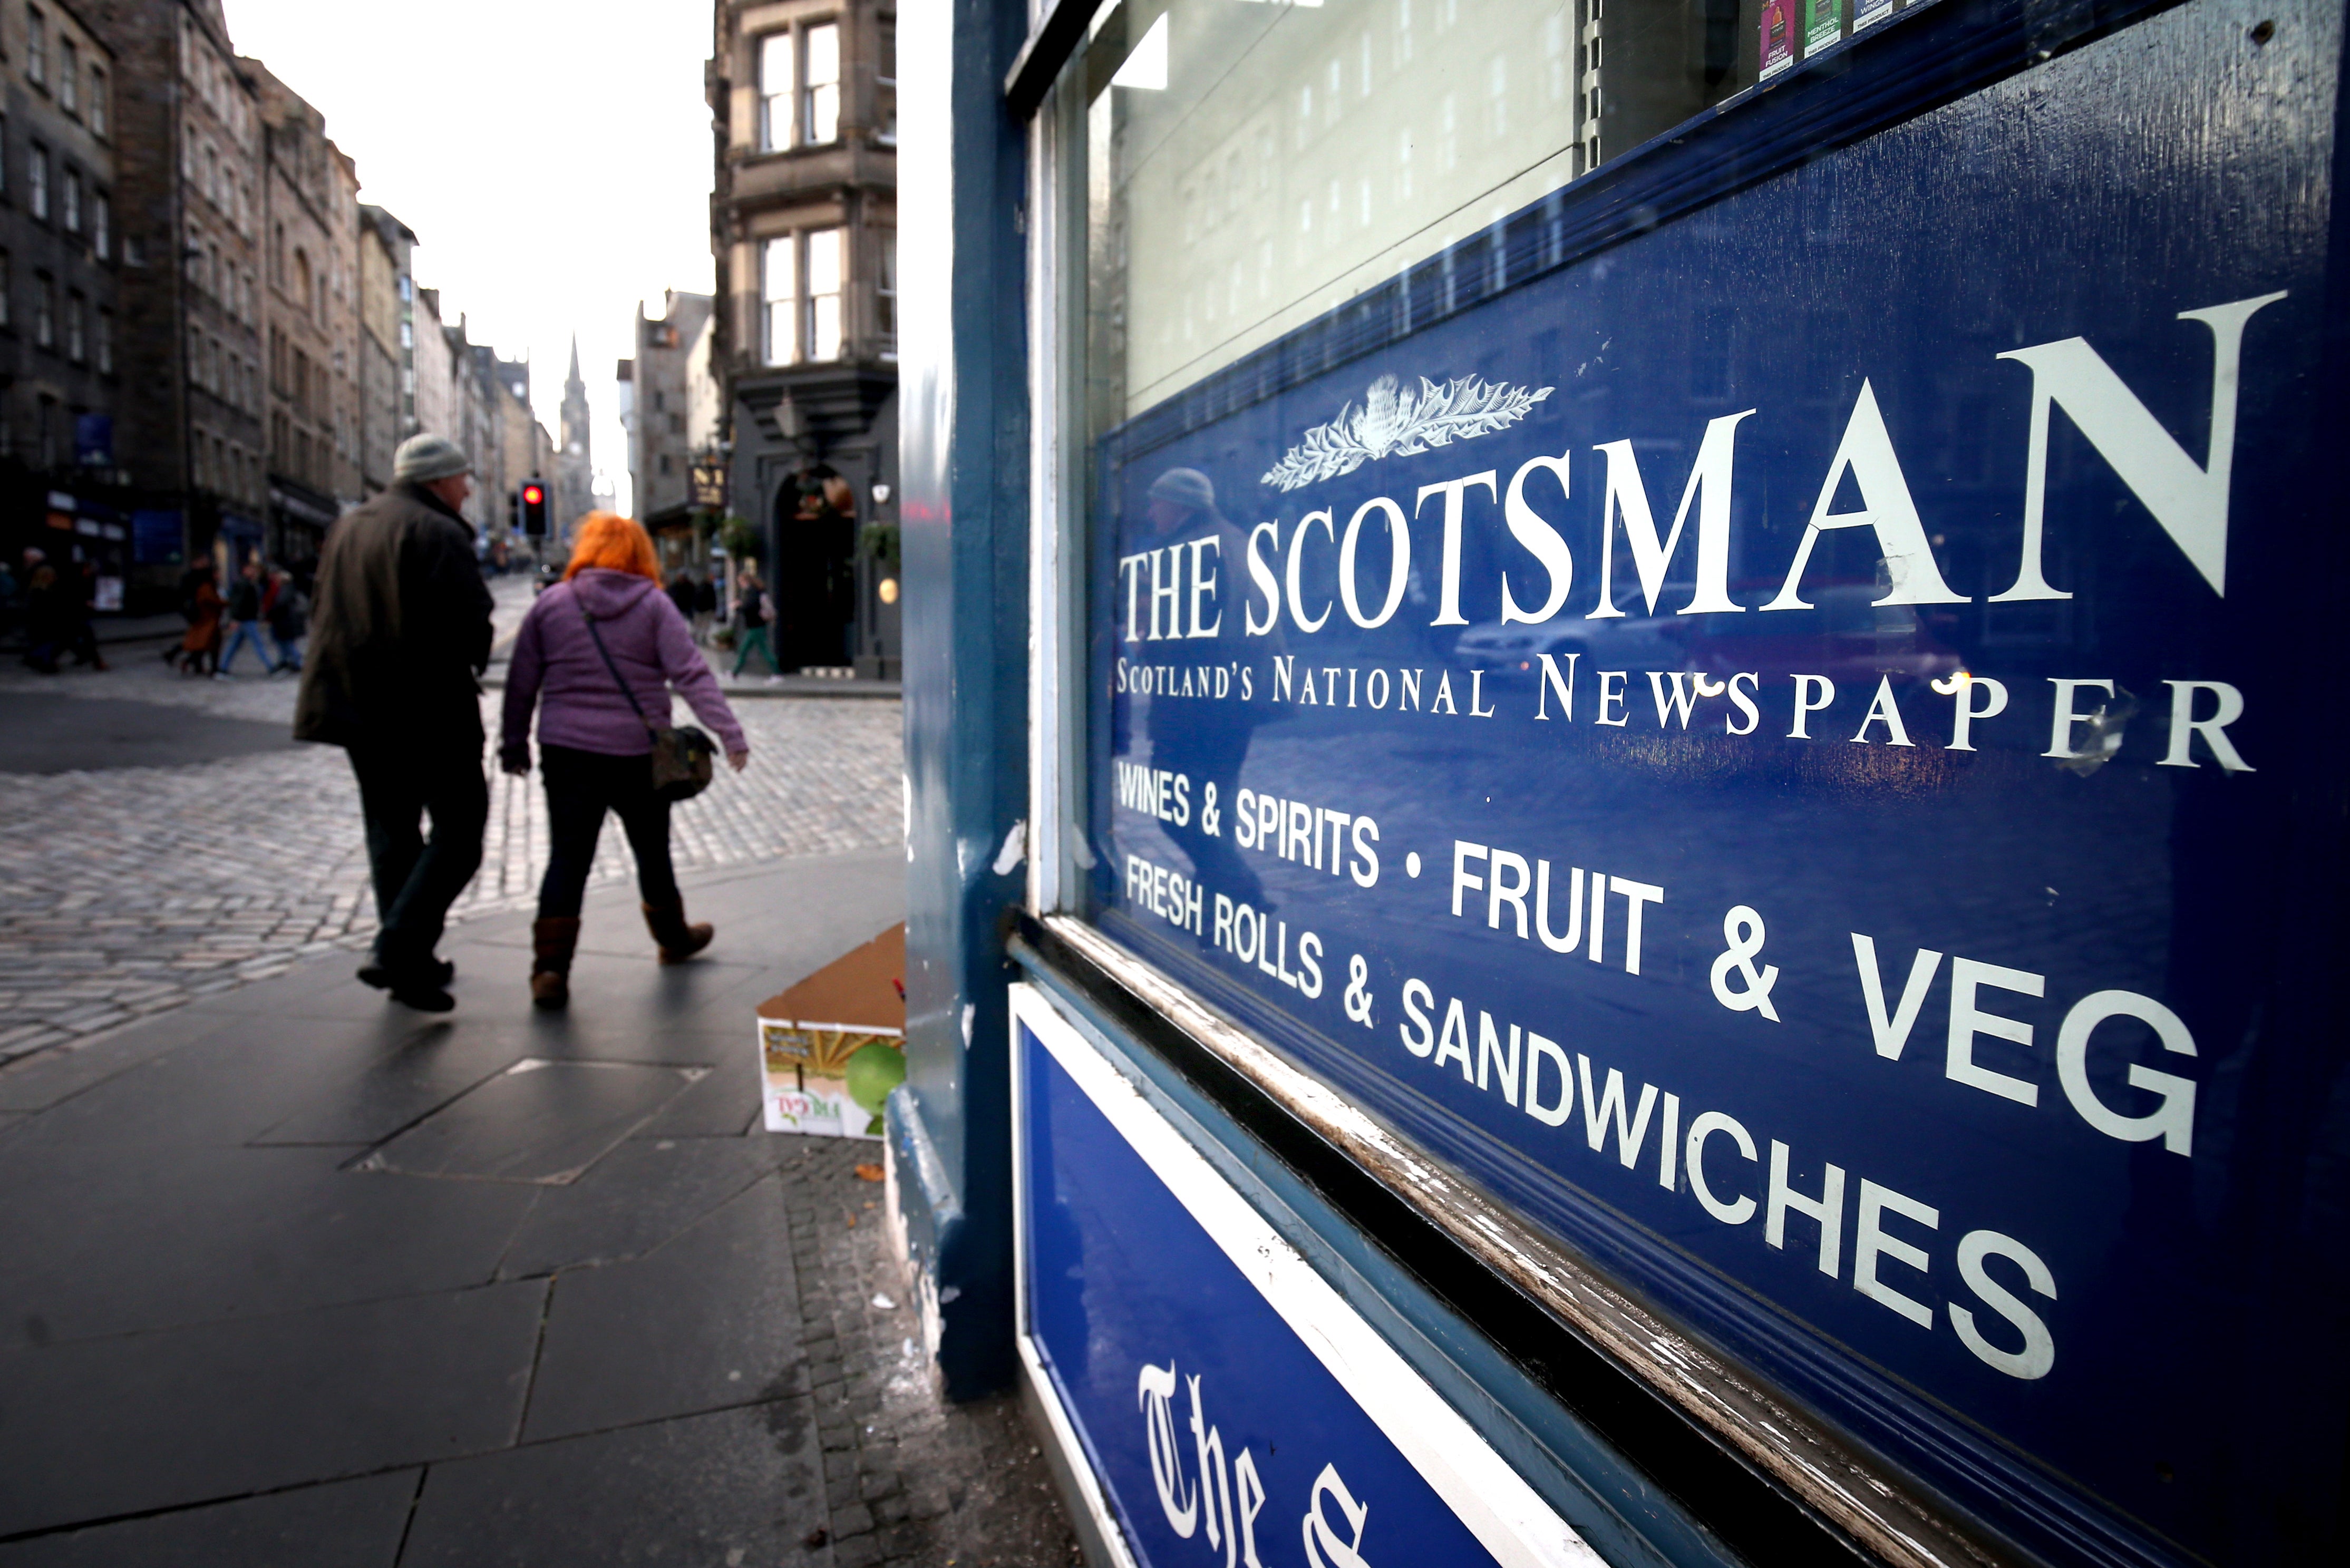 The Scotsman newspaper, one of the titles owned by JPI Media, which has now struck a deal to be taken over by National World